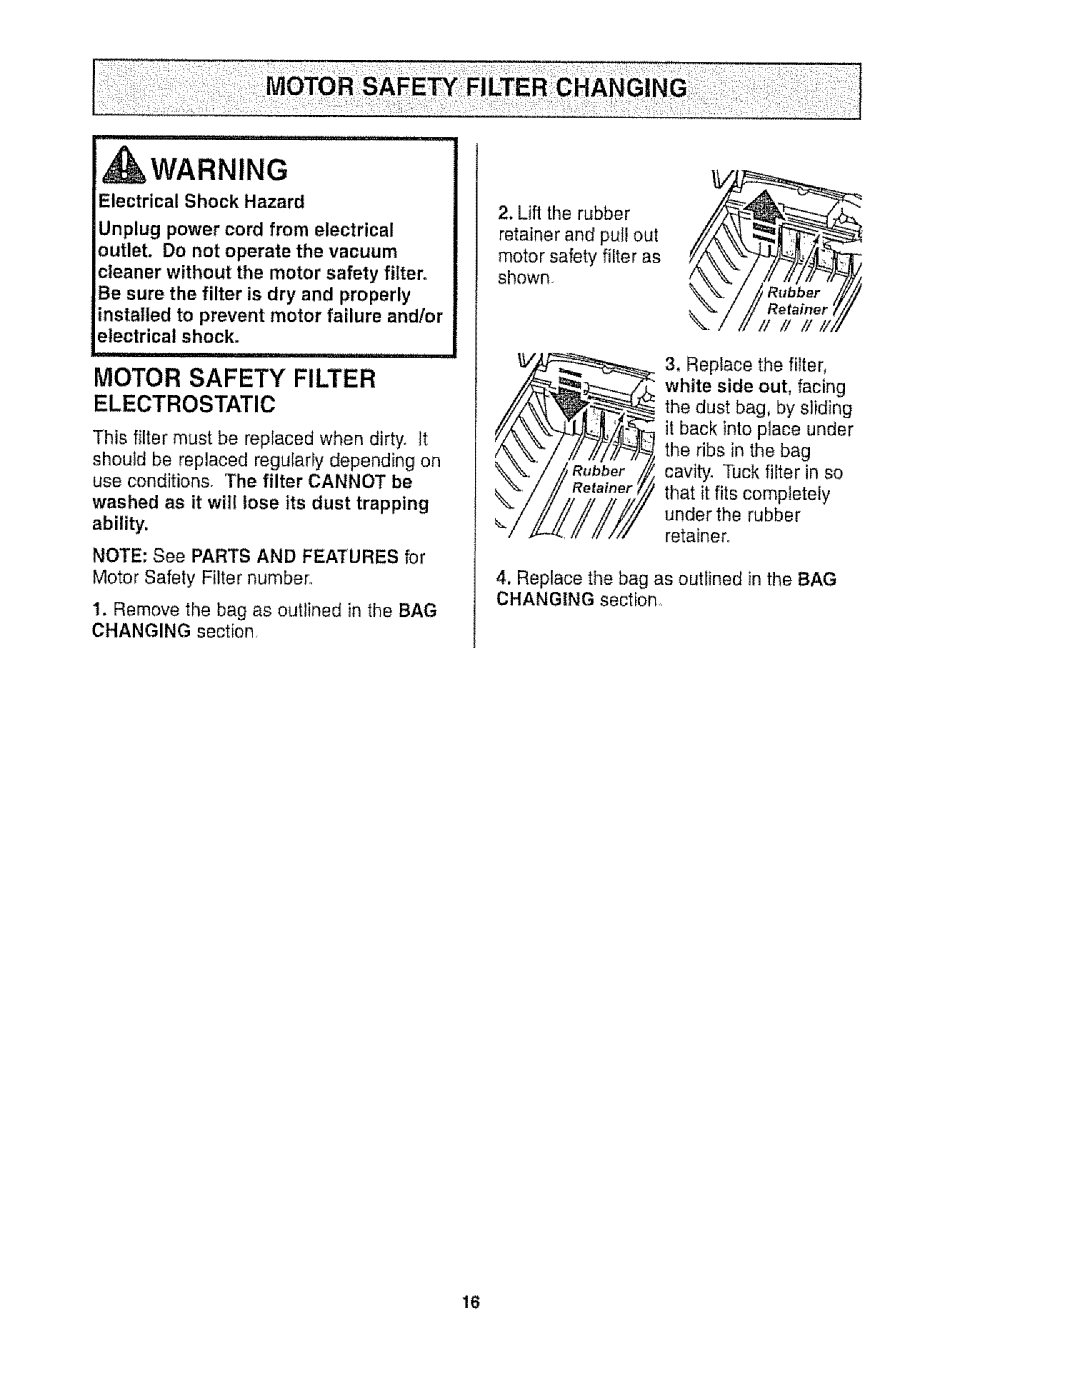 Kenmore 116.25812 owner manual Motor Safety Filter, Electrostatic, washed as it will lose its dust trapping ability 